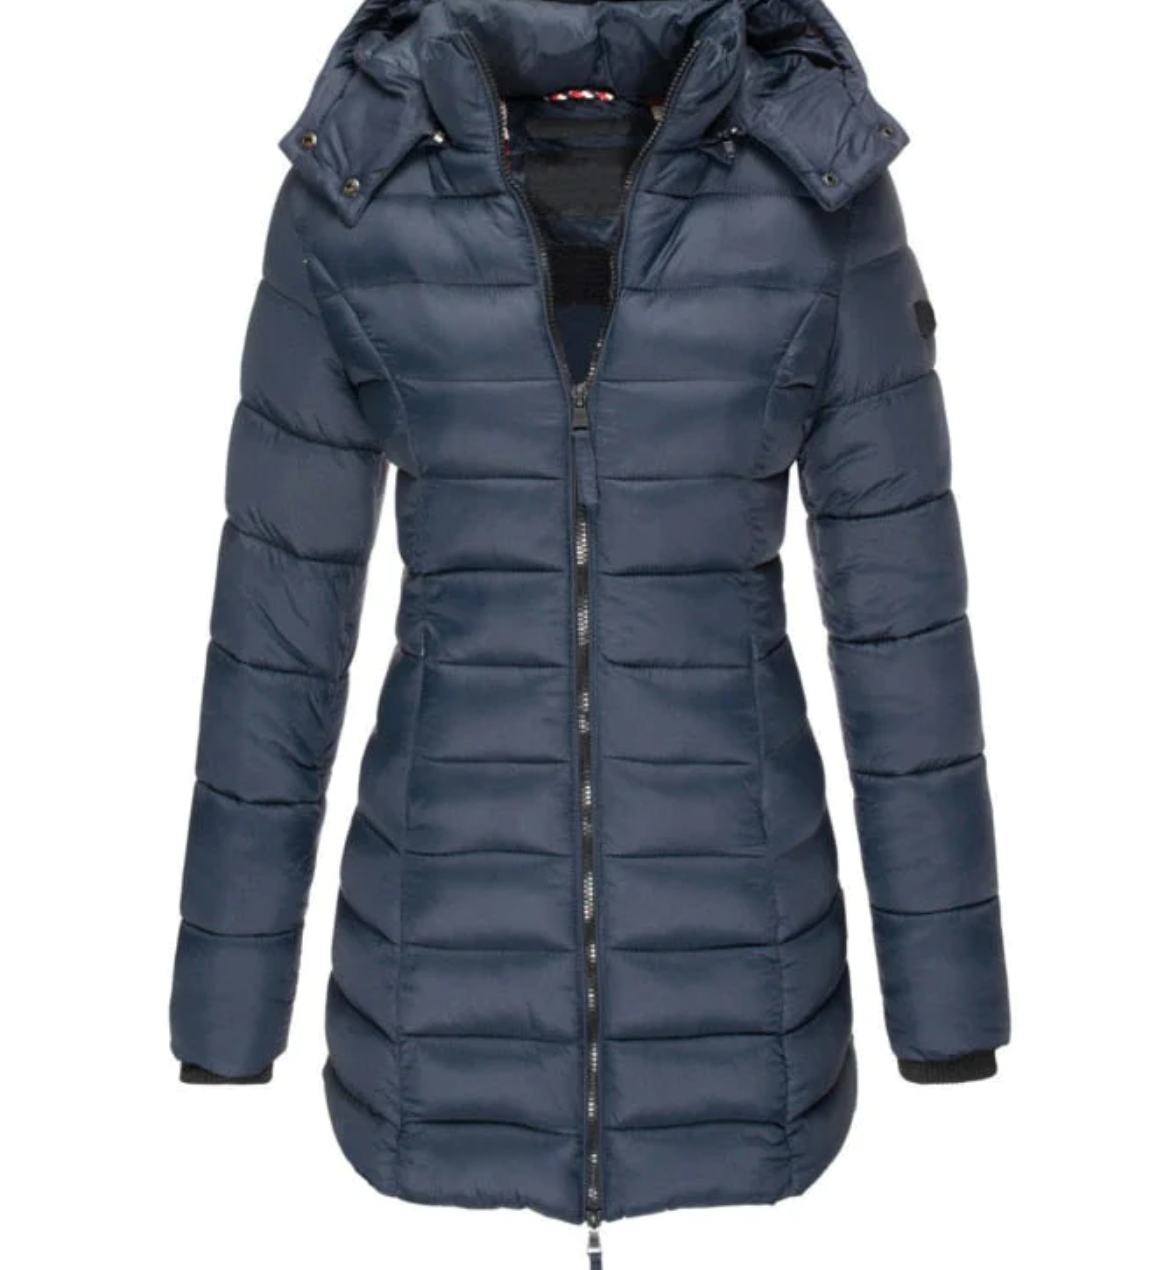 Elisa - The best and cosiest down jacket